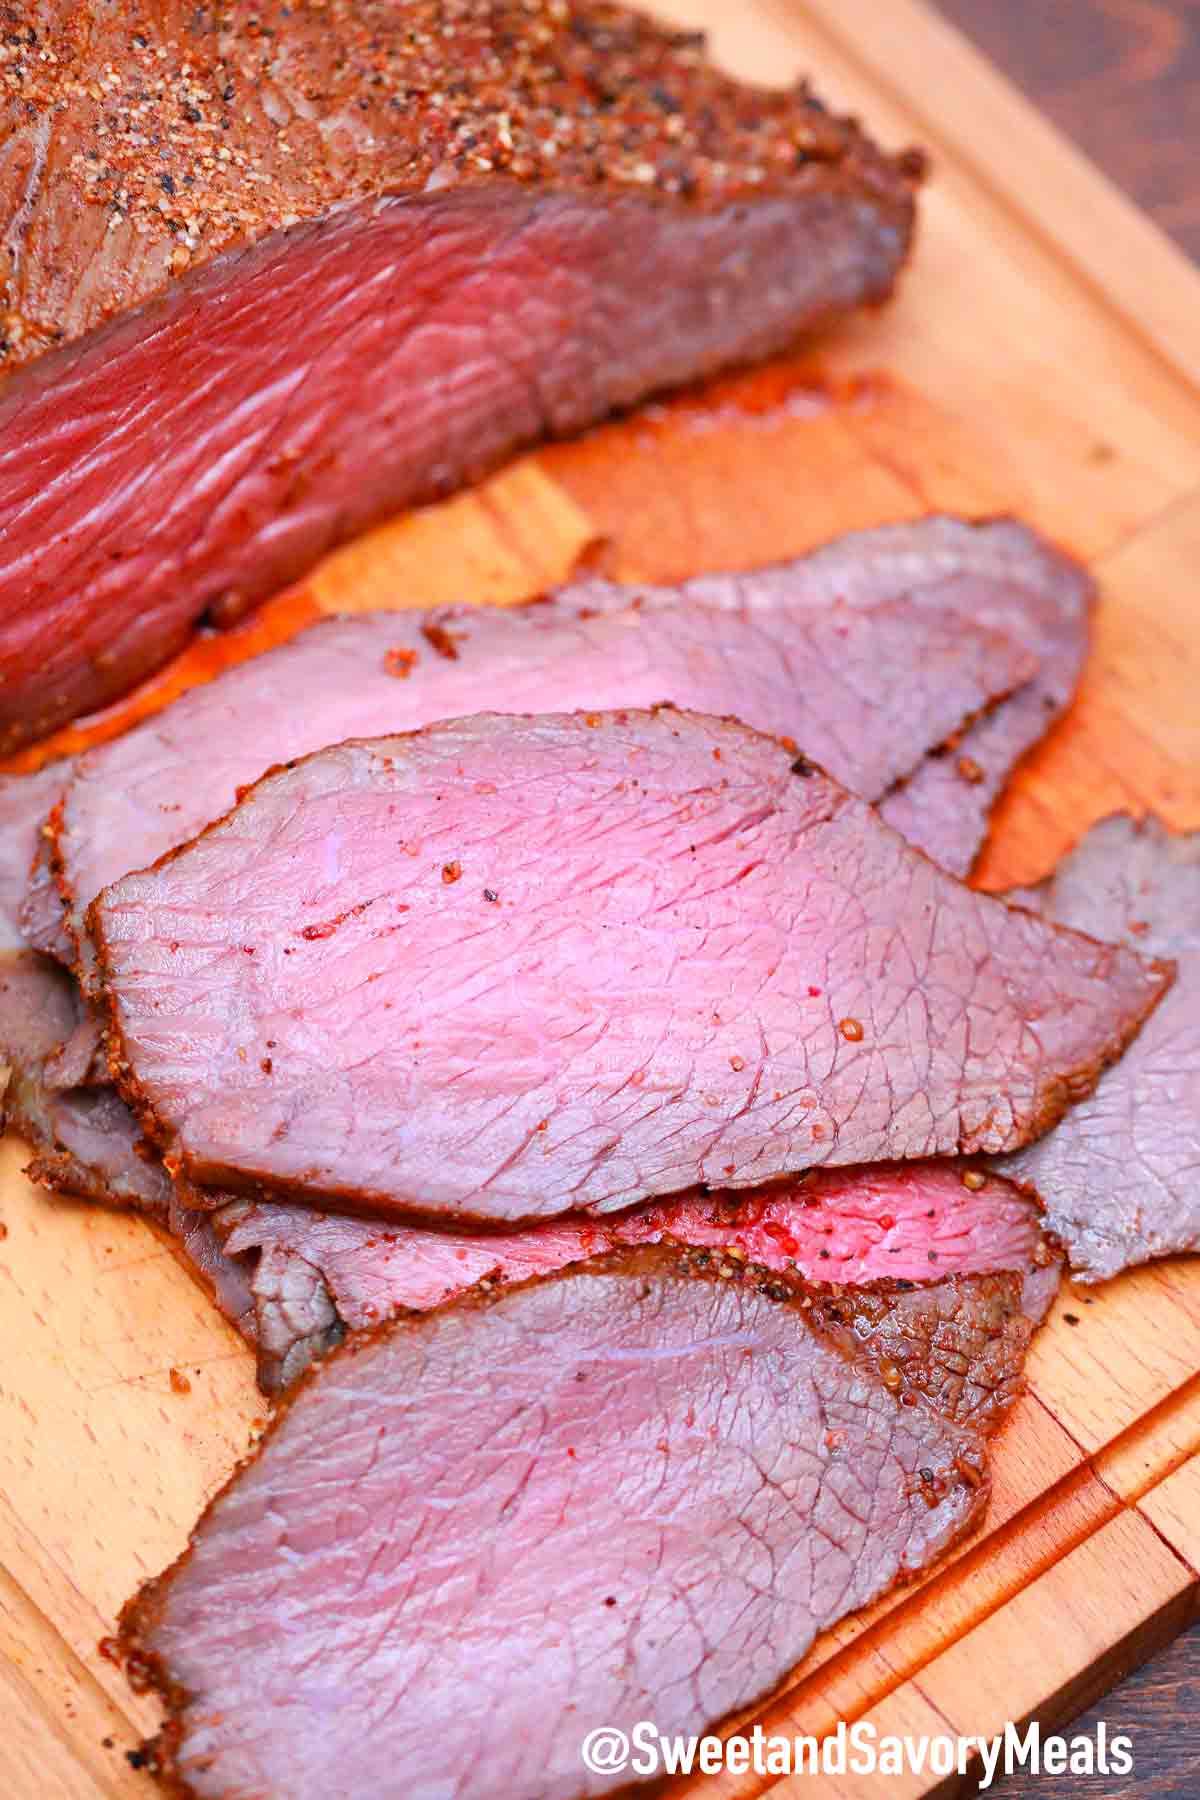 Homemade Pastrami Recipe [Video] - Sweet and Savory Meals